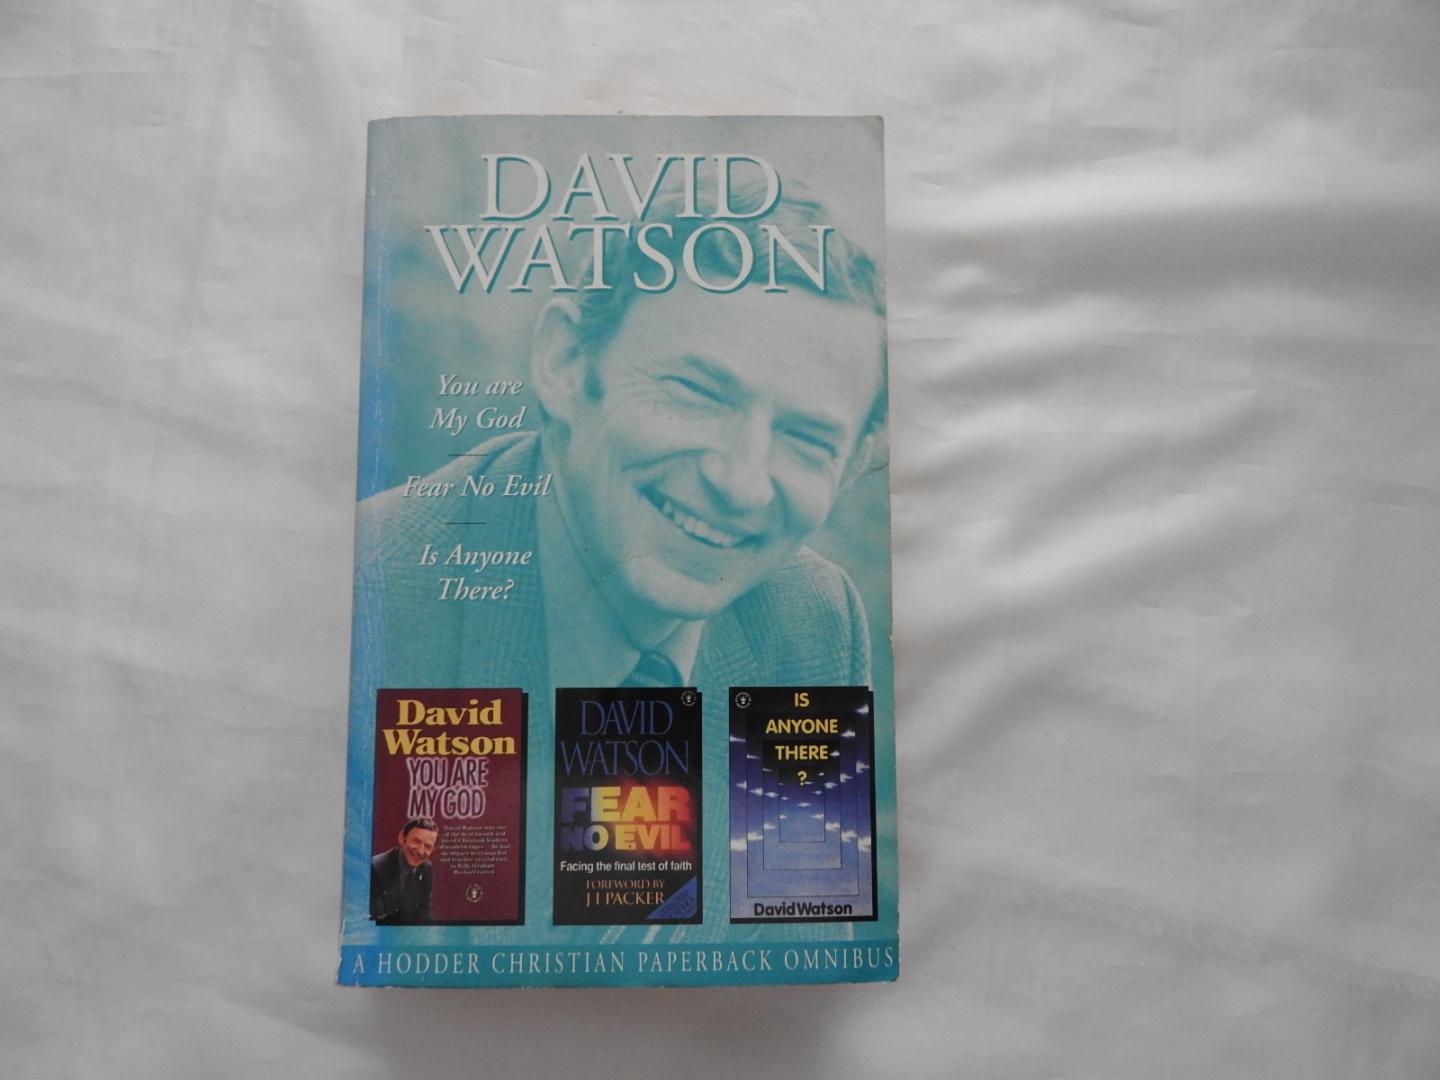 David Watson D. - You are my God - Fear no evil - Is anyone There ? --- - A HODDER CHRISTIAN PAPERBACK OMNIBUS.